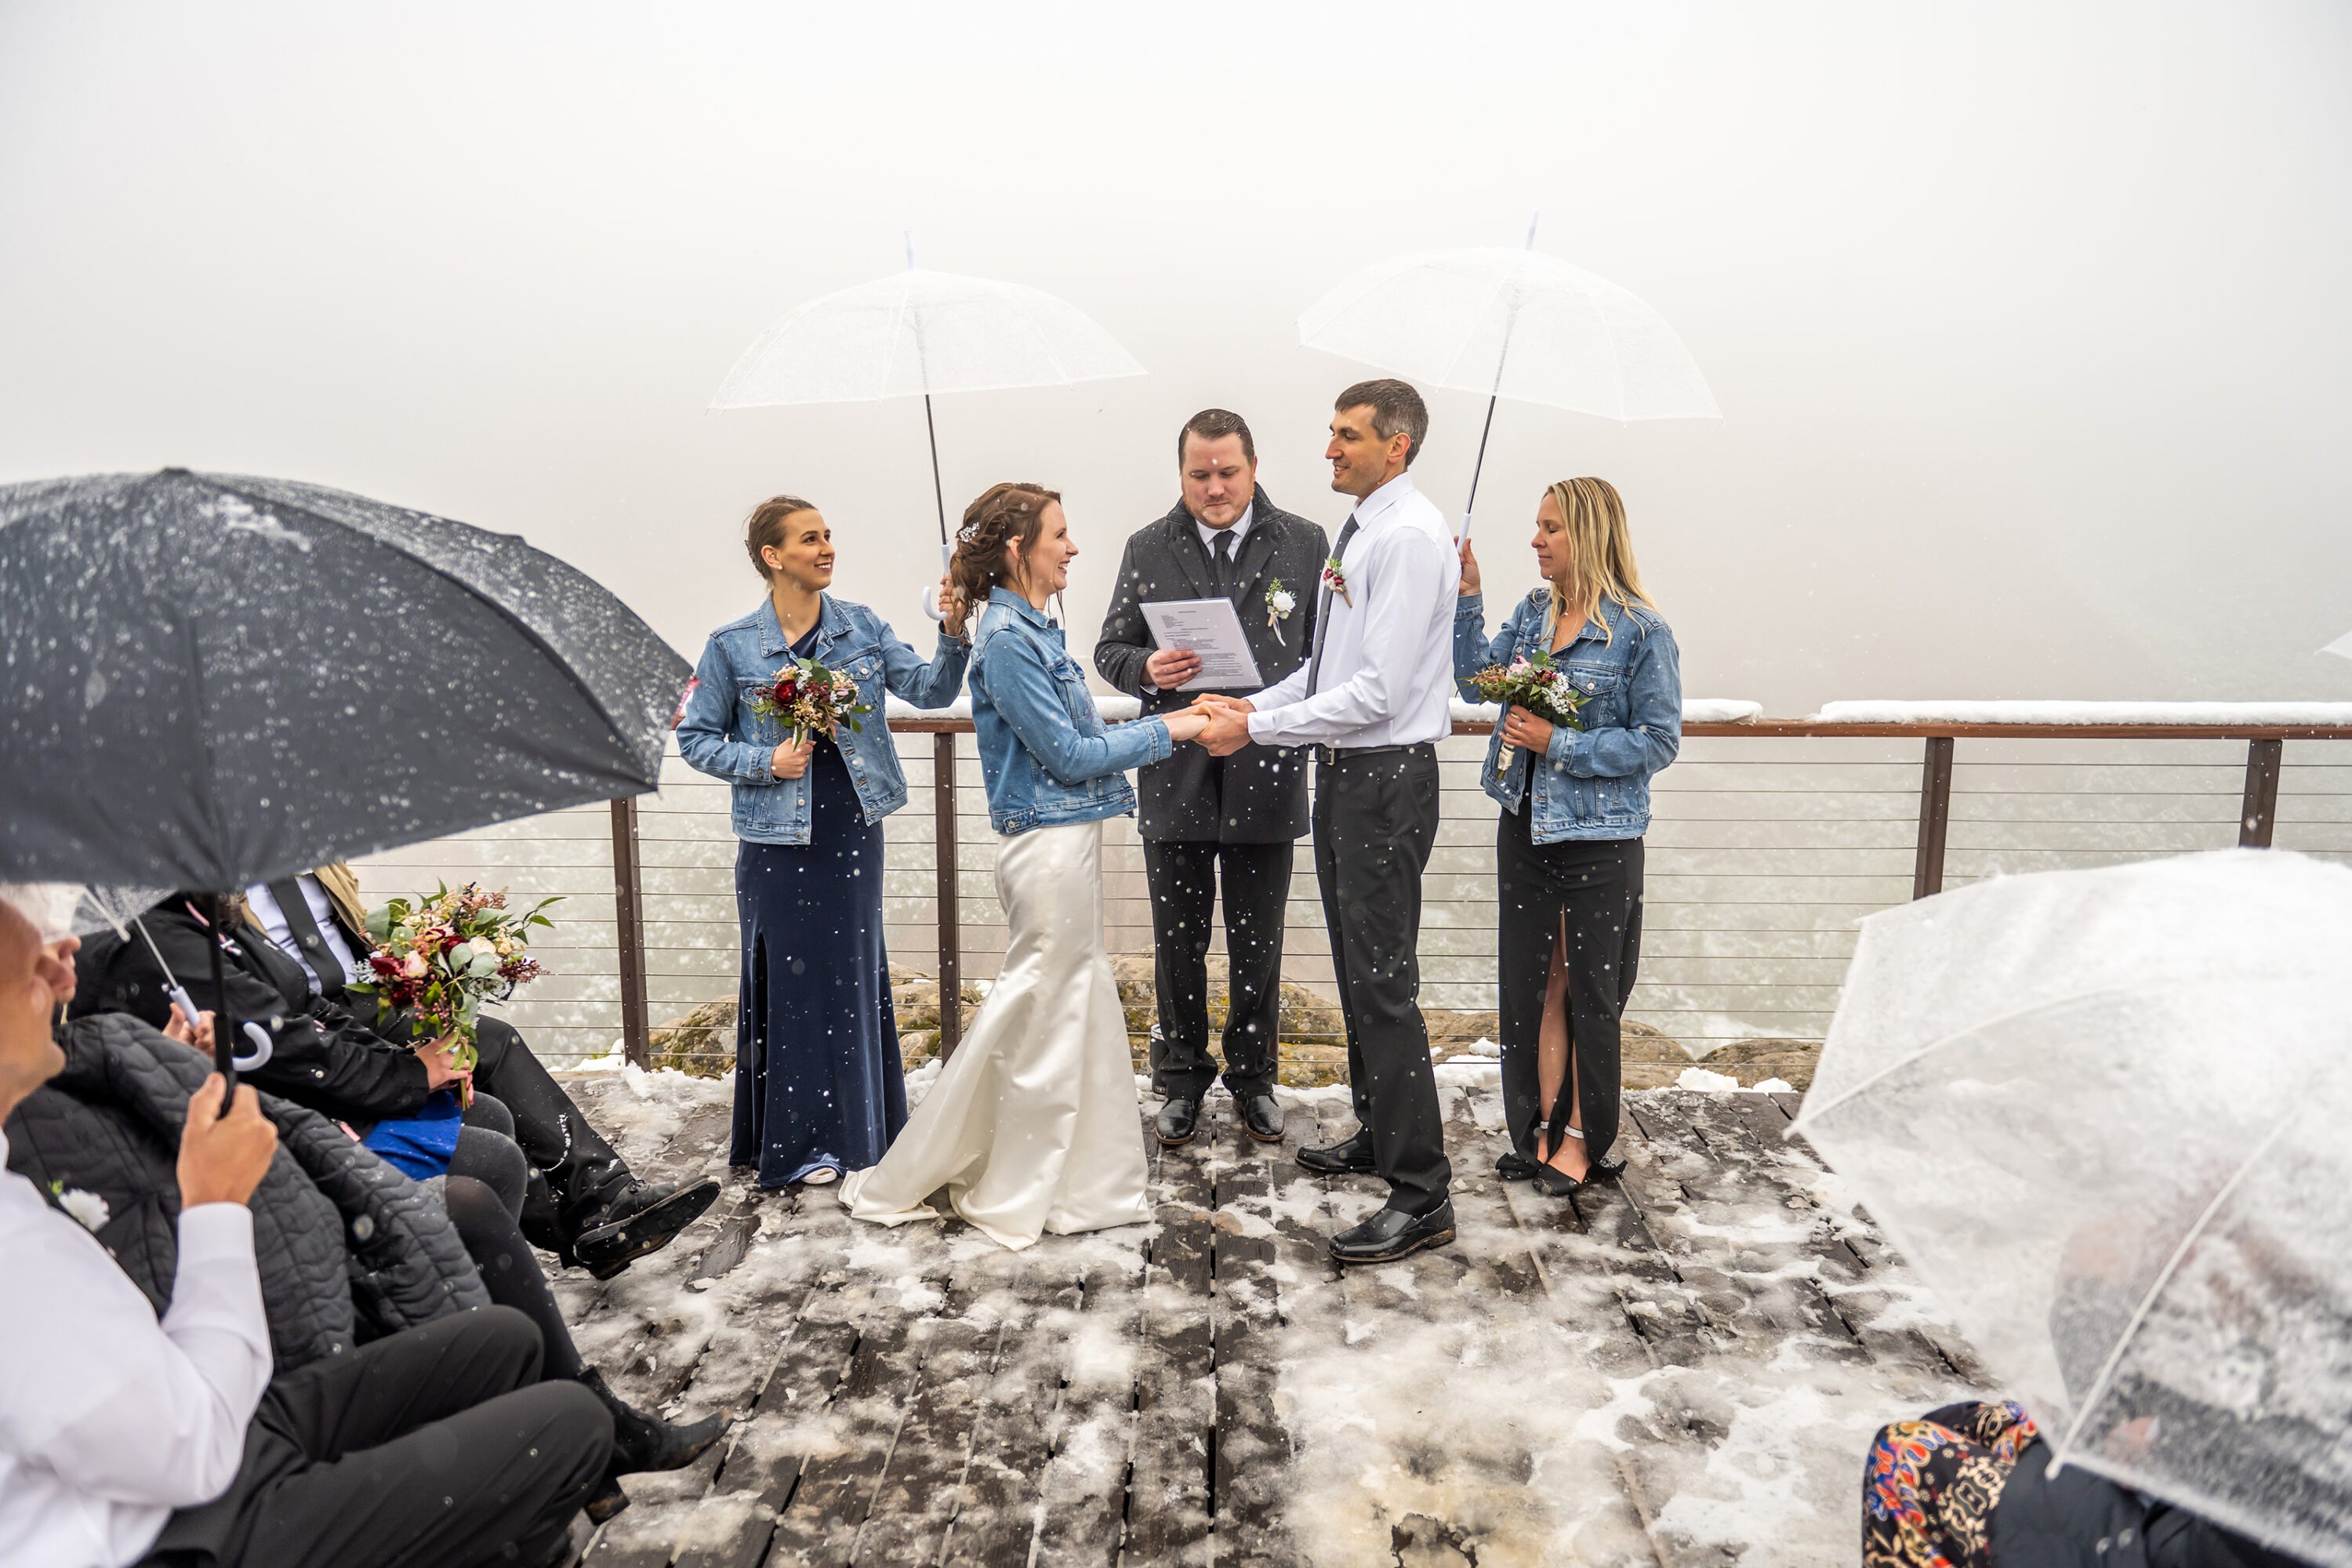 Roxborough State Park wedding at Lyons Overlook in the snow with Liz and Andrew.